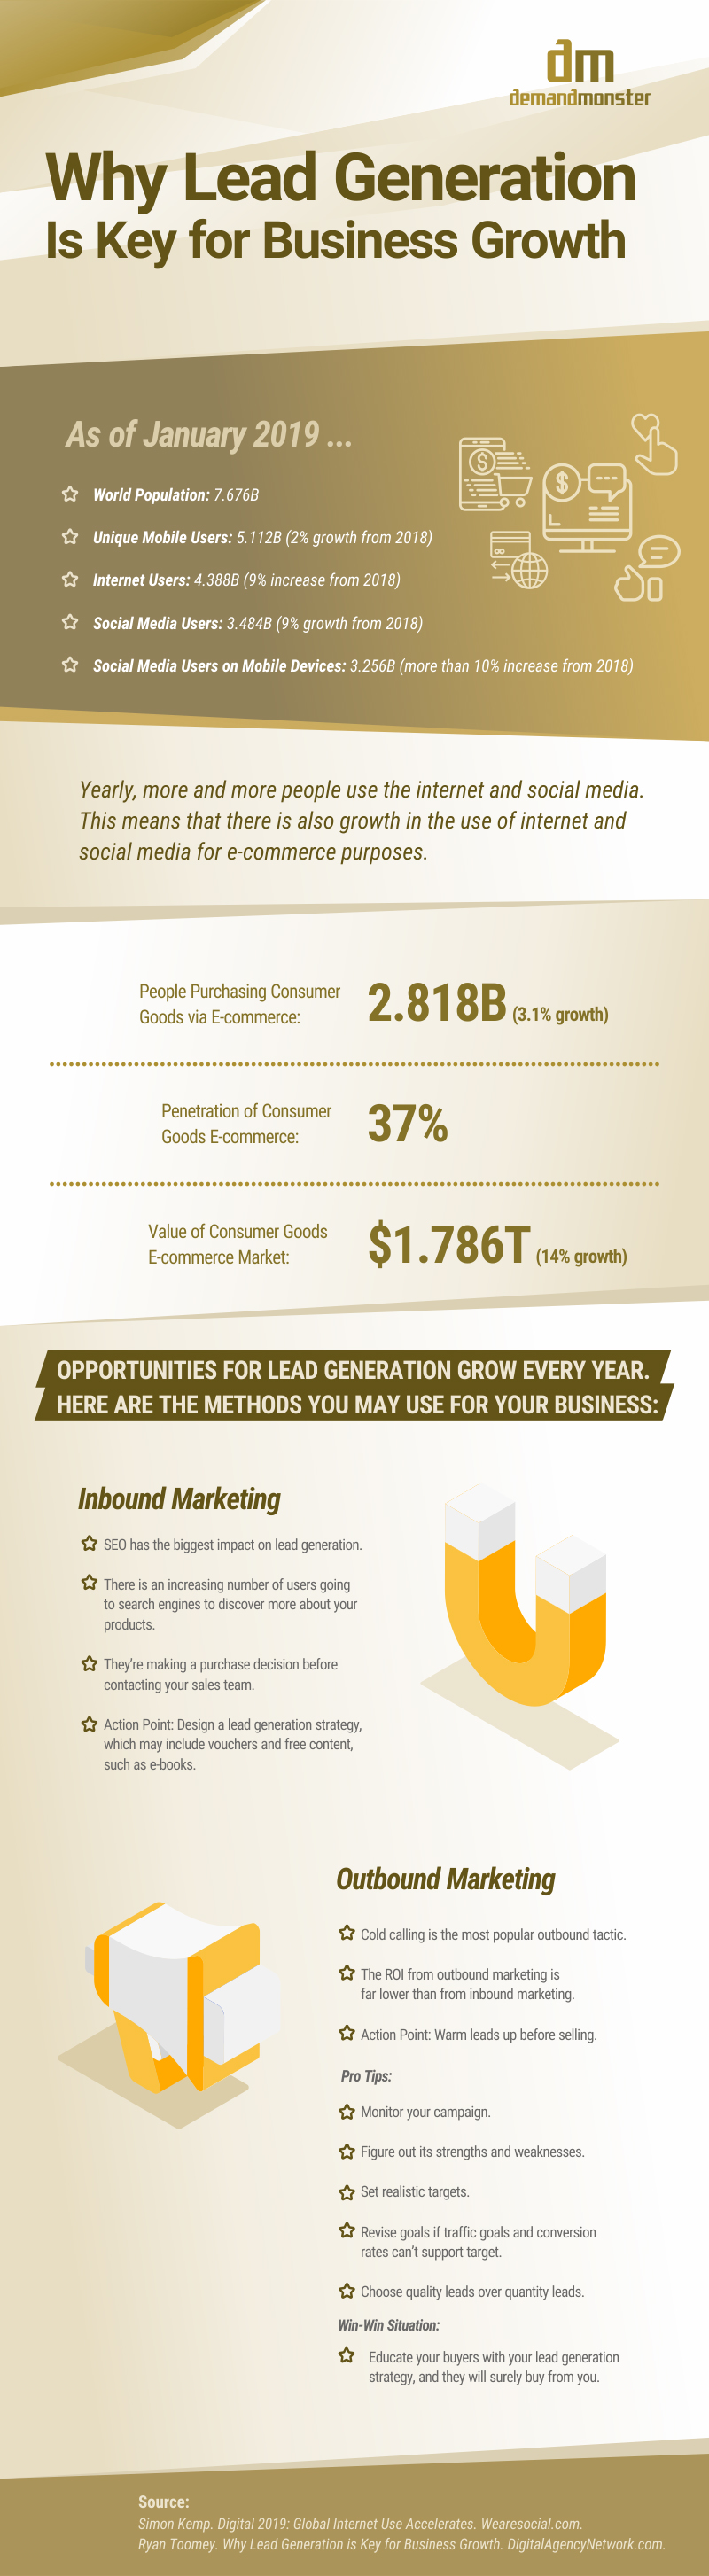 Why Lead Generation Is Key for Business Growth